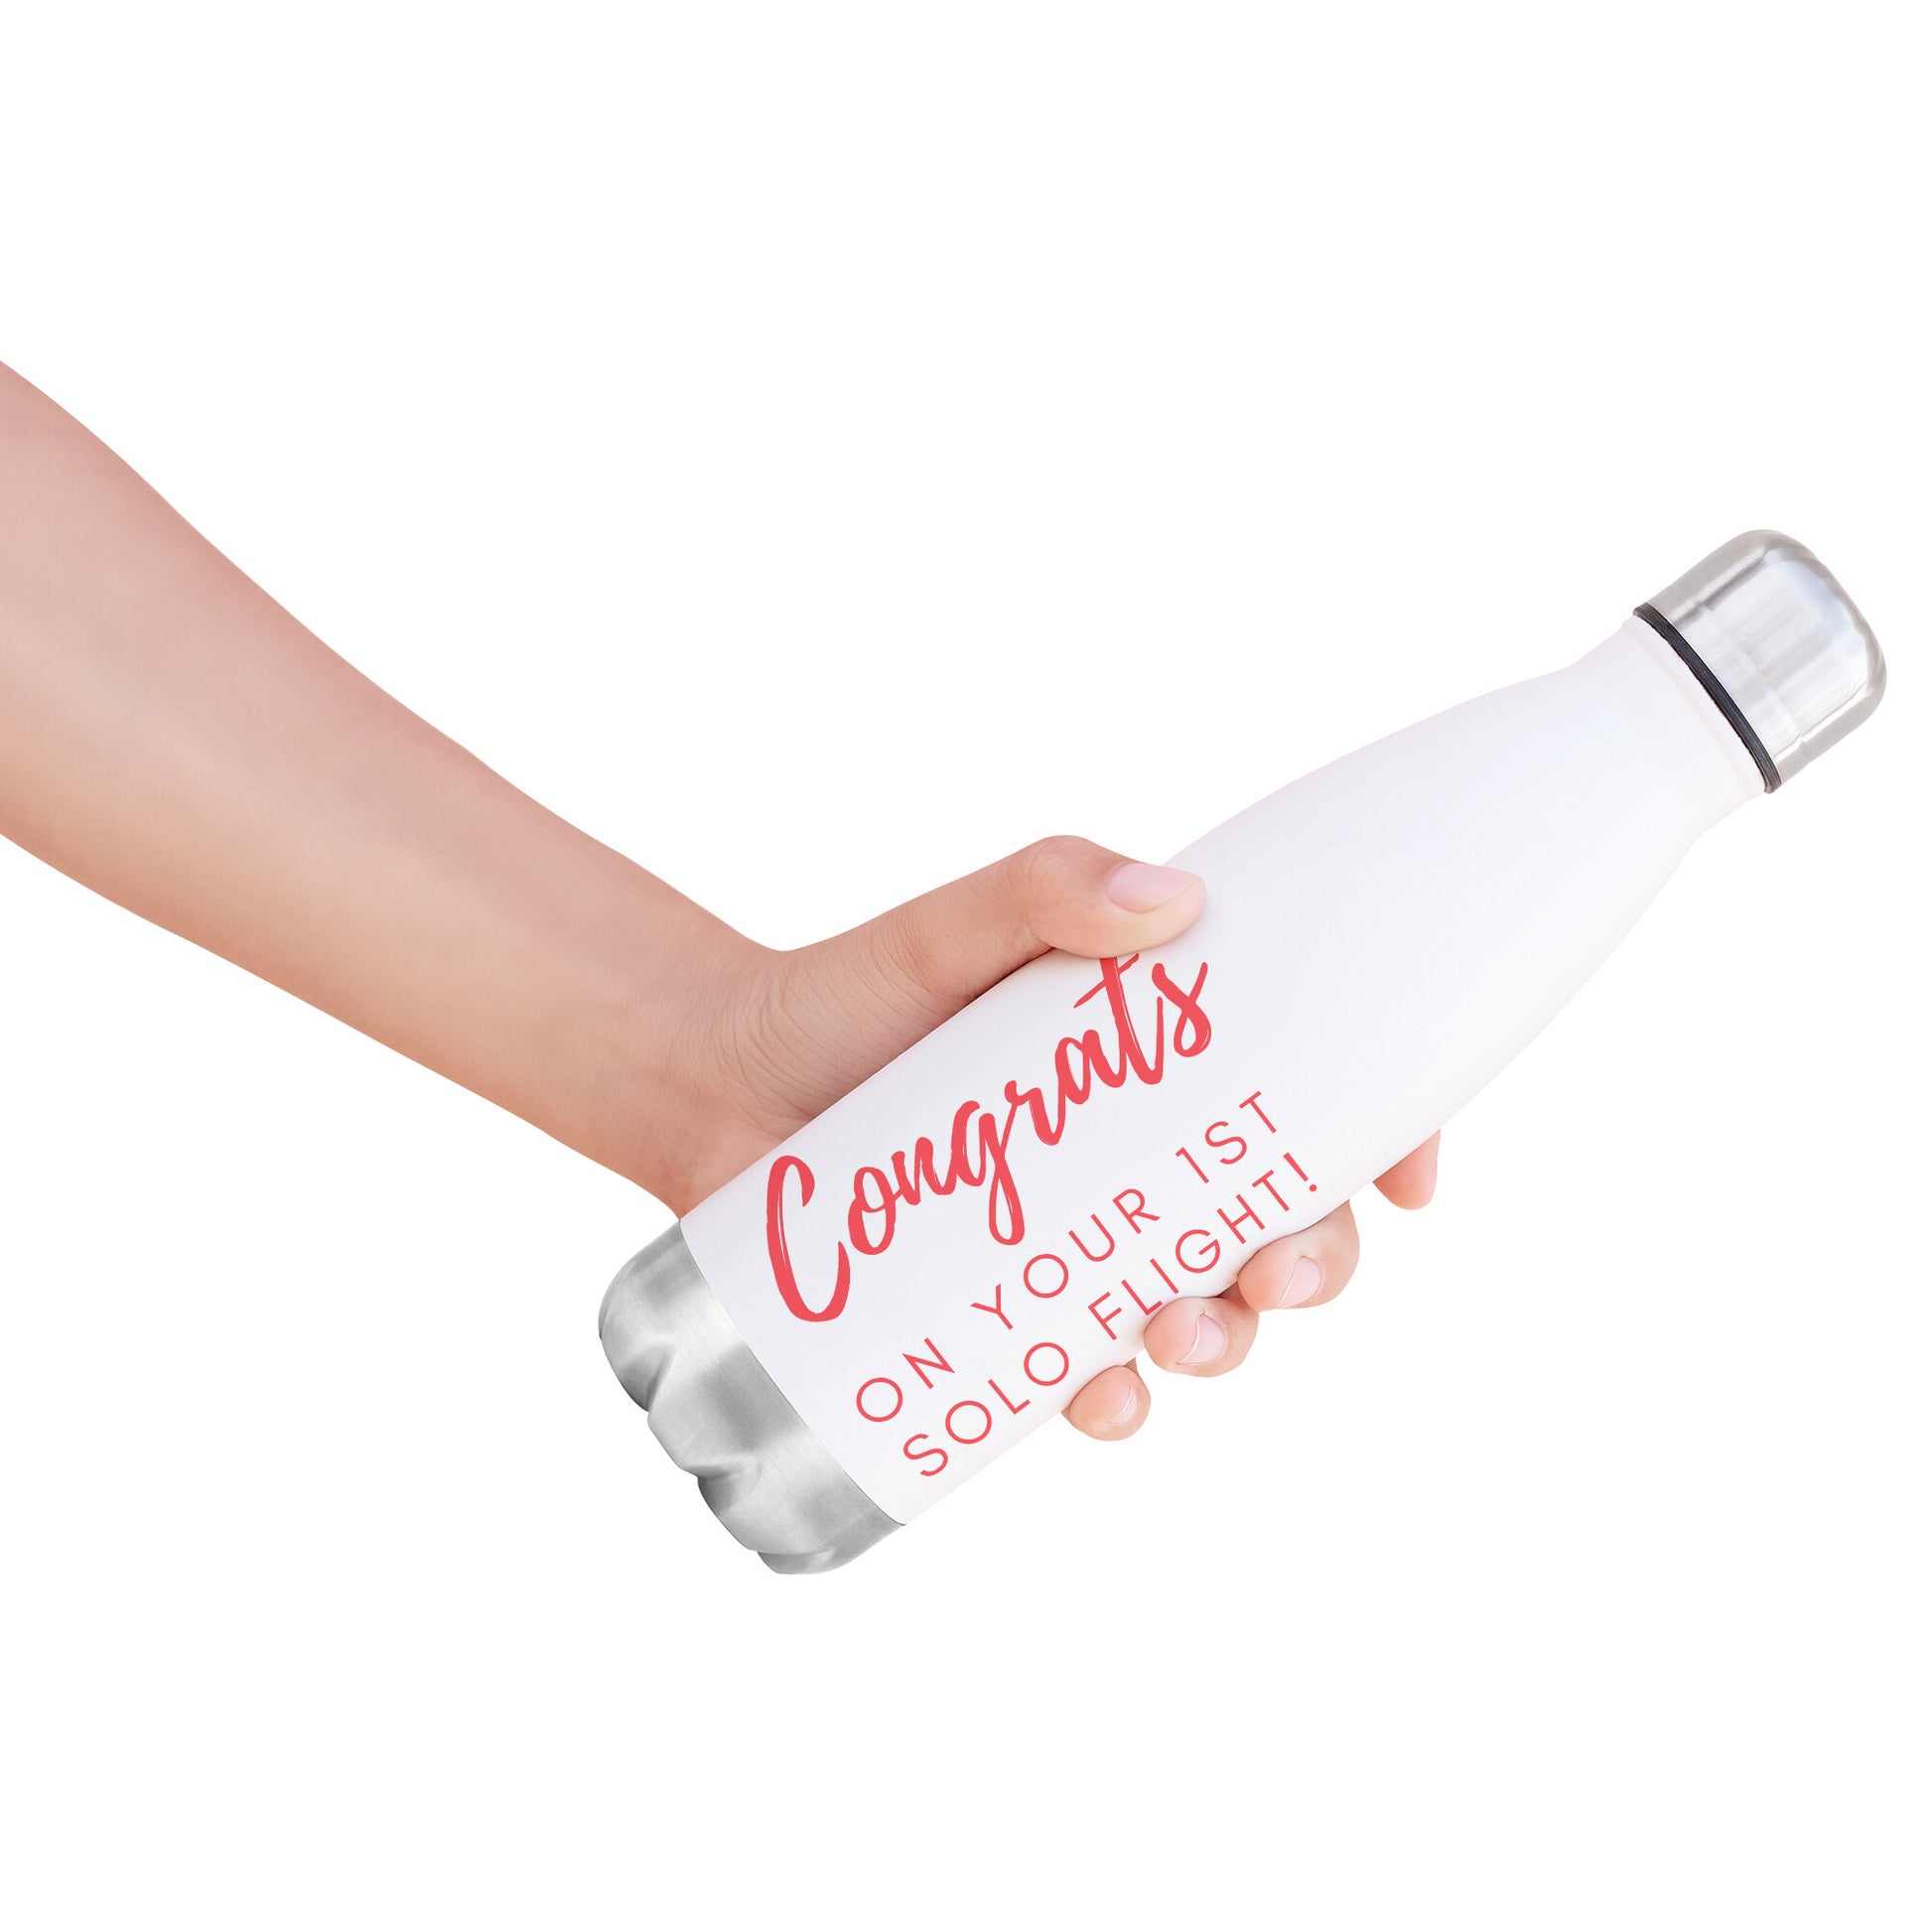 Congrats on your first solo flight! - stainless steel water bottle